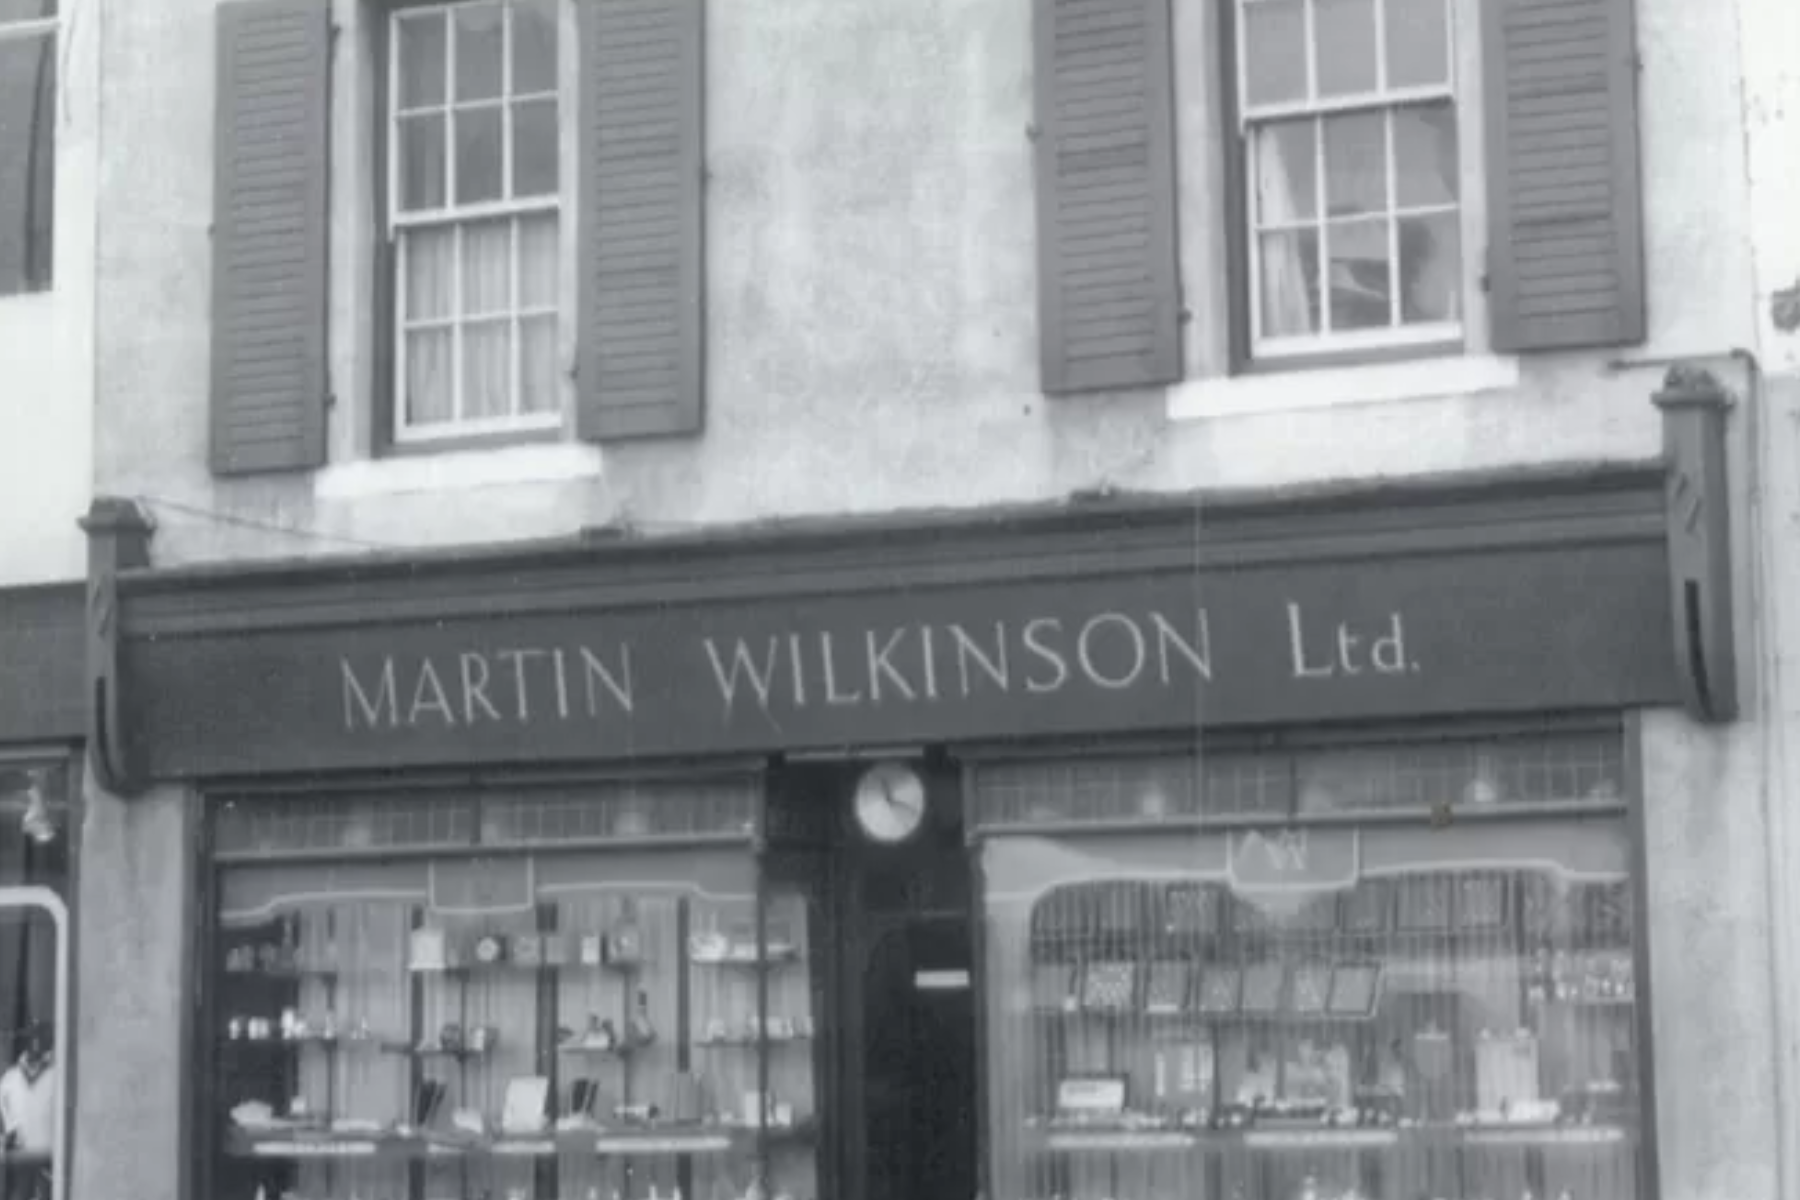 The previous premises of the business was in Kinson House, Queen Street, between 1928 and 1974